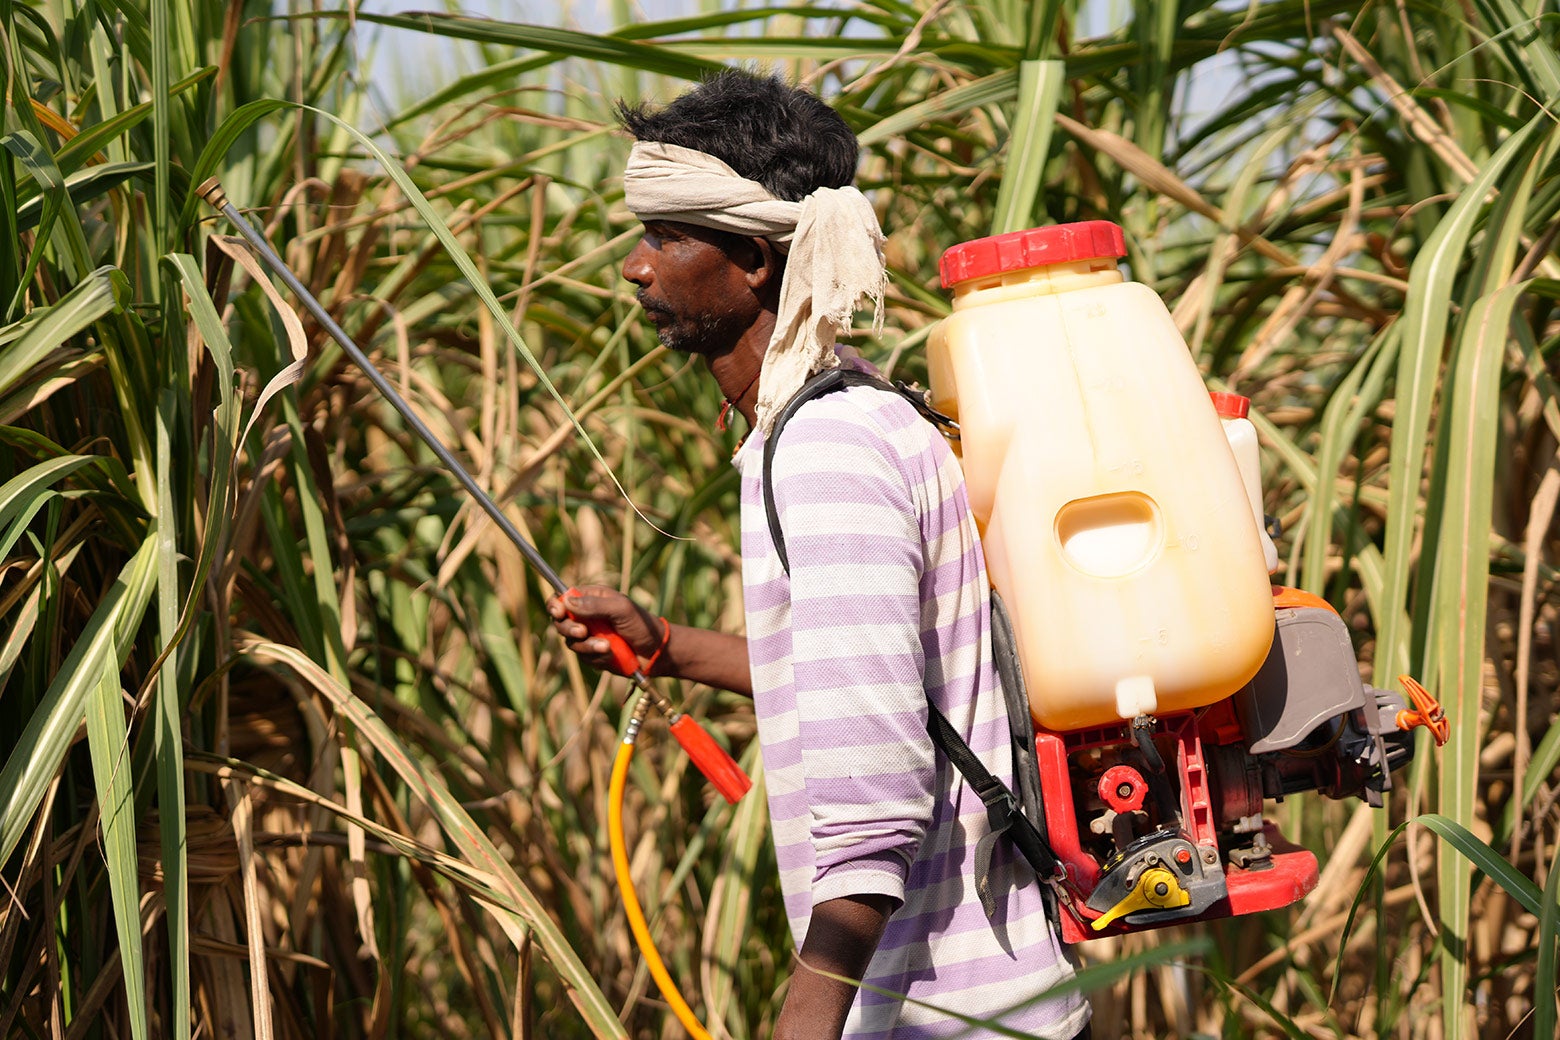 Hardeep Sharma, wearing a thick headband and carrying a tank on his back, sprays insecticide on a sugarcane field.